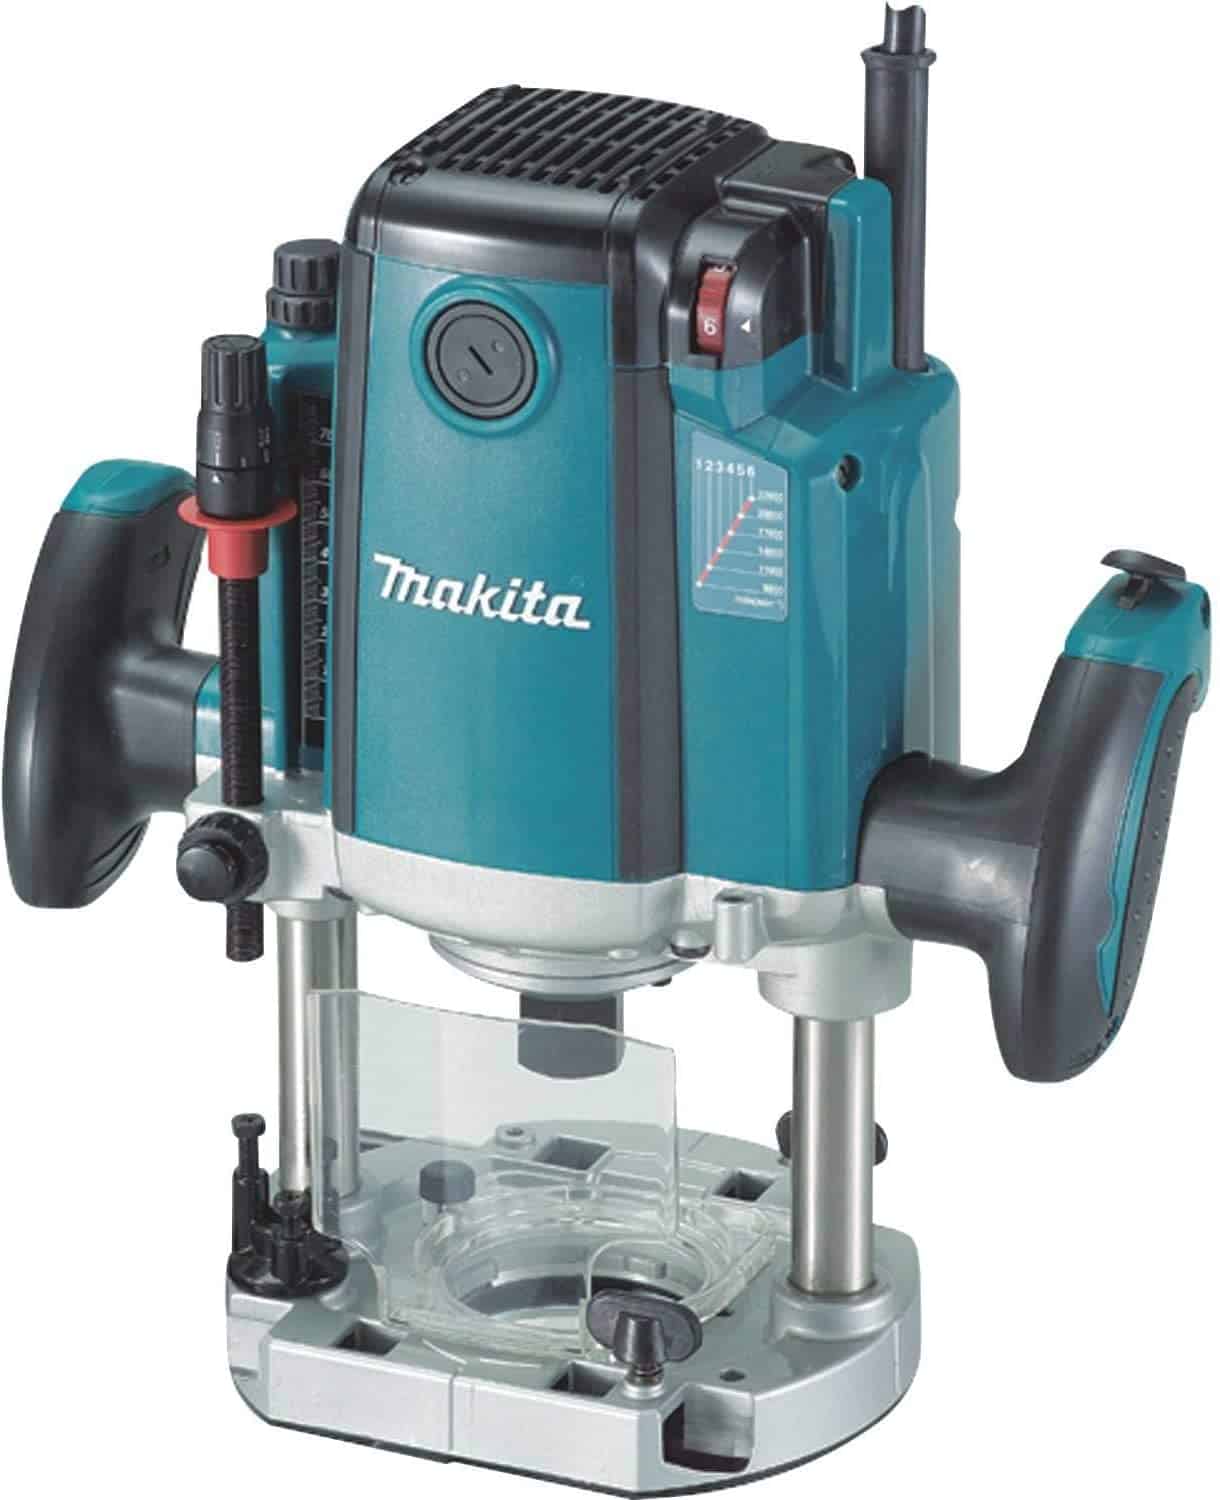 Makita RP2301FC Plunge router